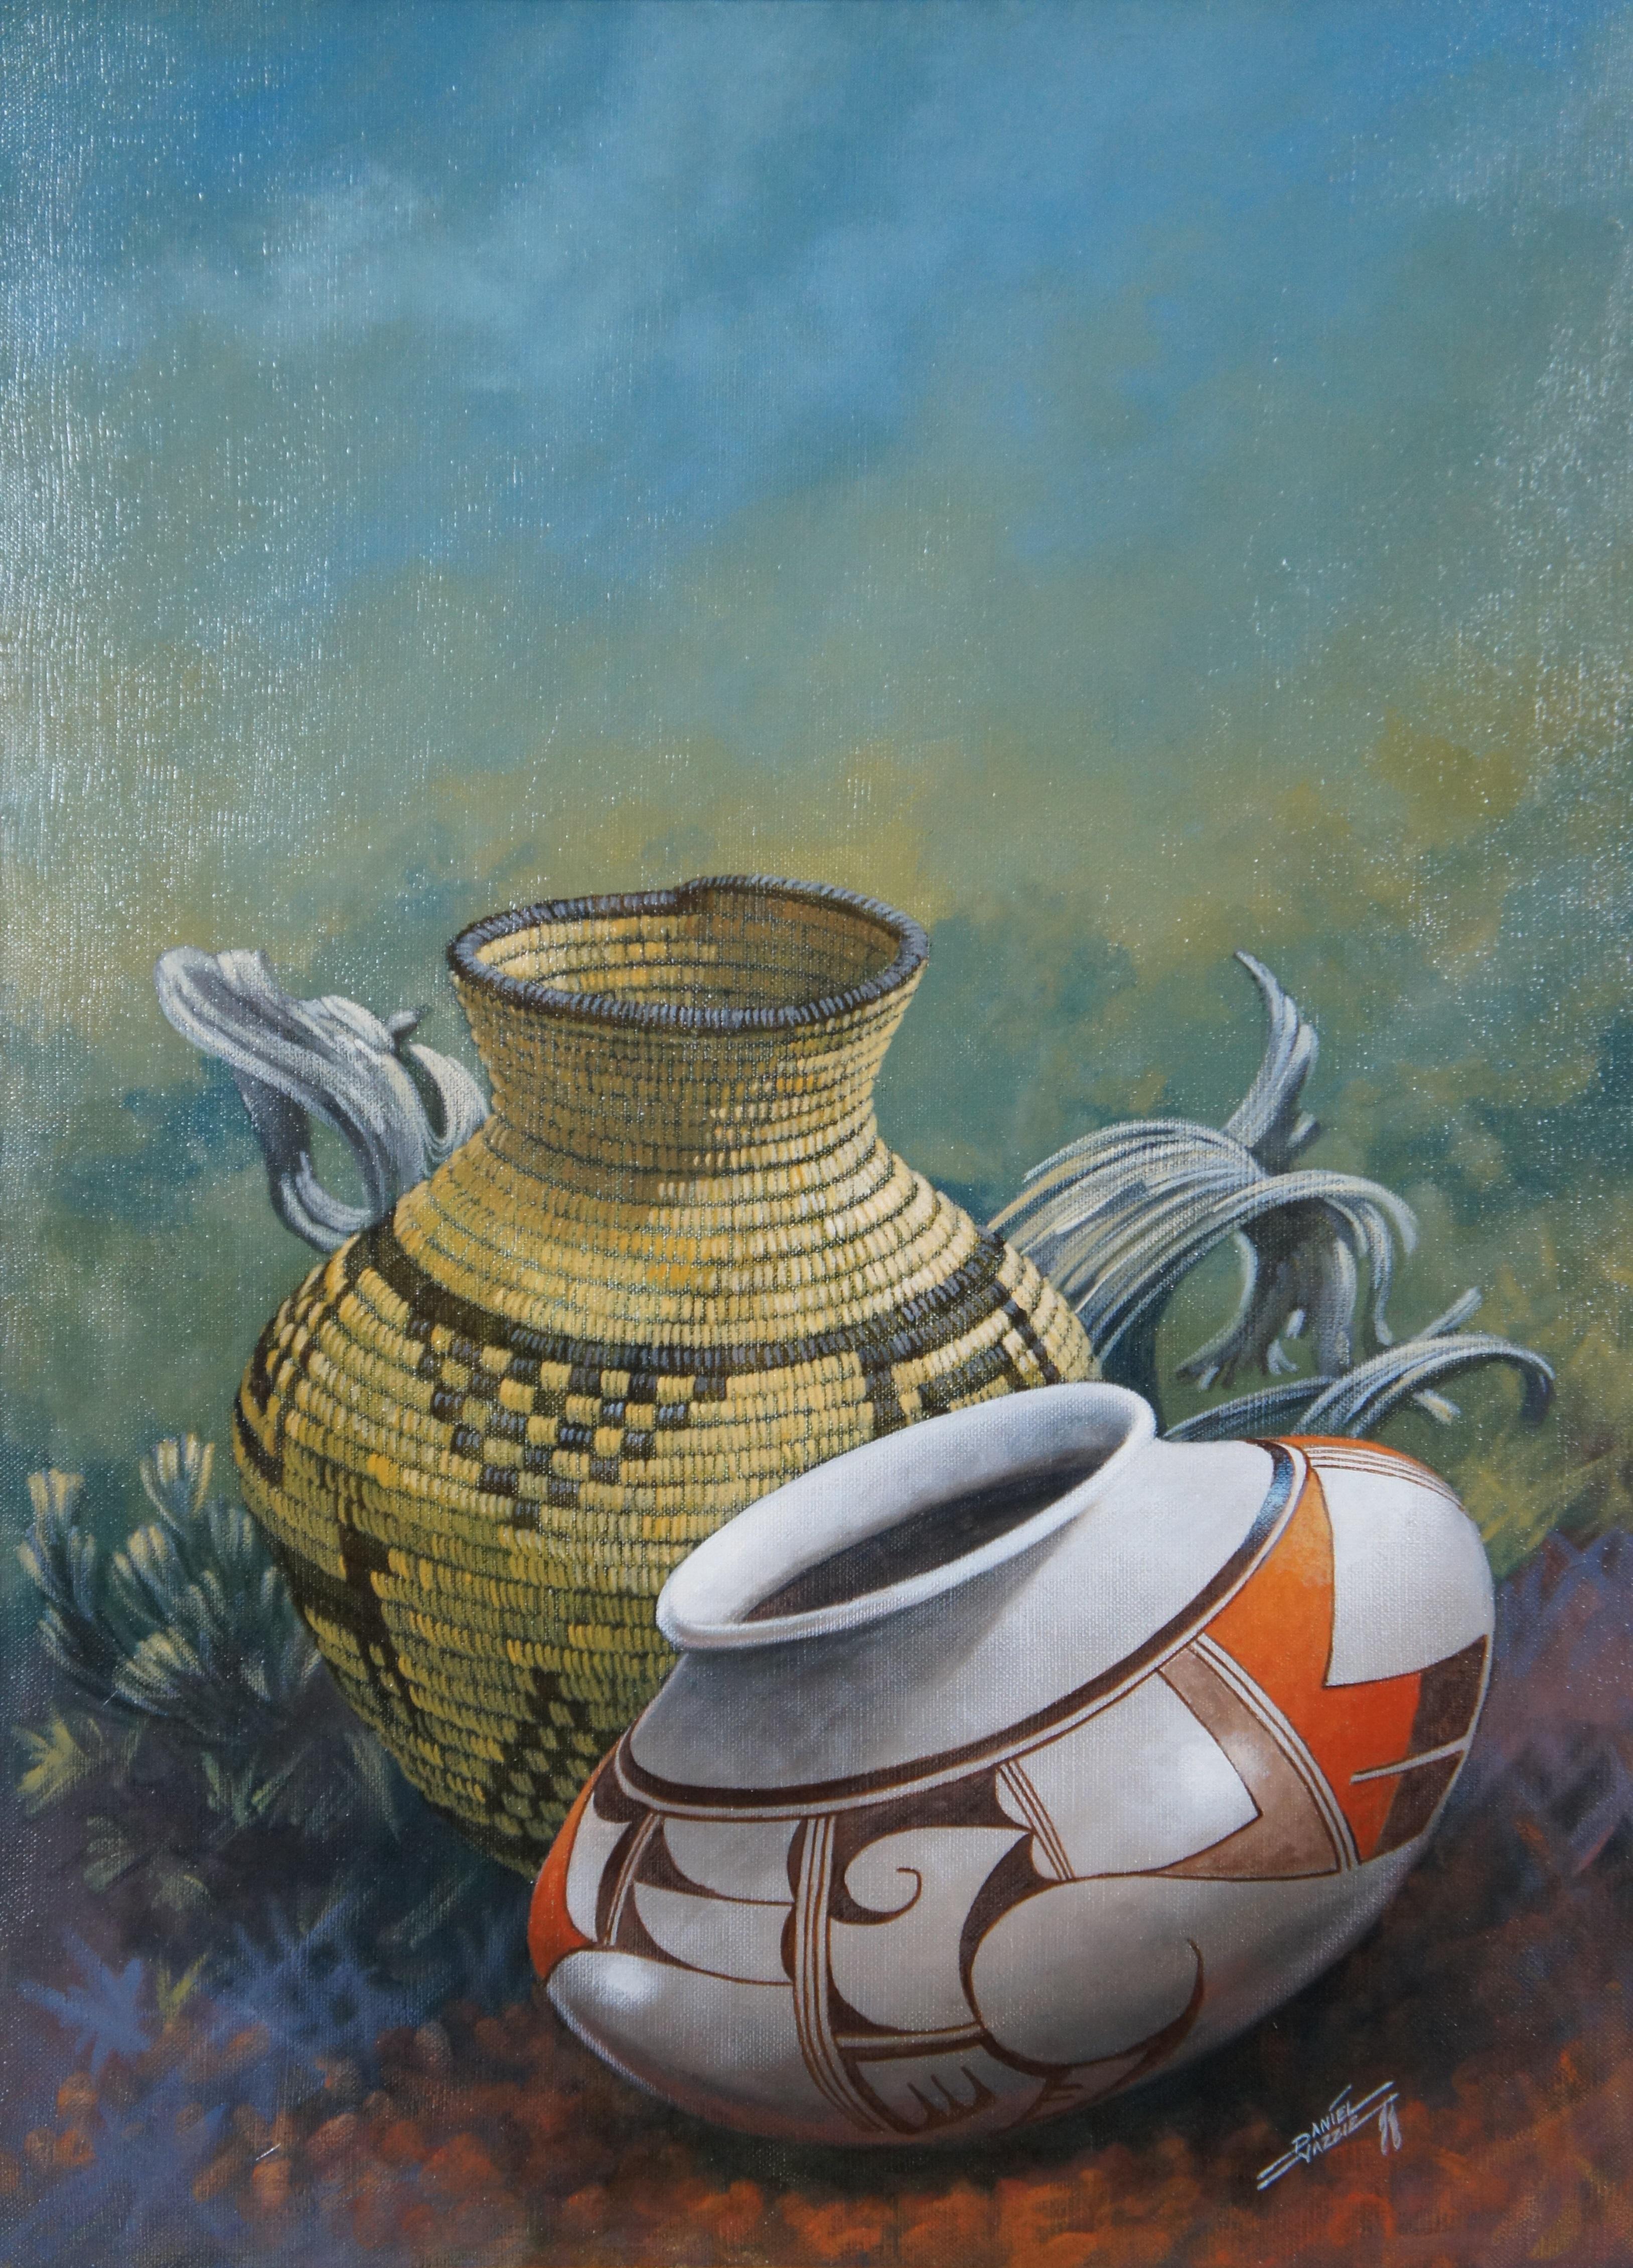 Vibrant oil on canvas still life painting by Daniel Yazzie, showing southwestern / Native American basket and pottery. Signed in lower right. Framed in light wood frame with raised bevel.

Daniel Yazzie (Navajo, 1954-2022)
